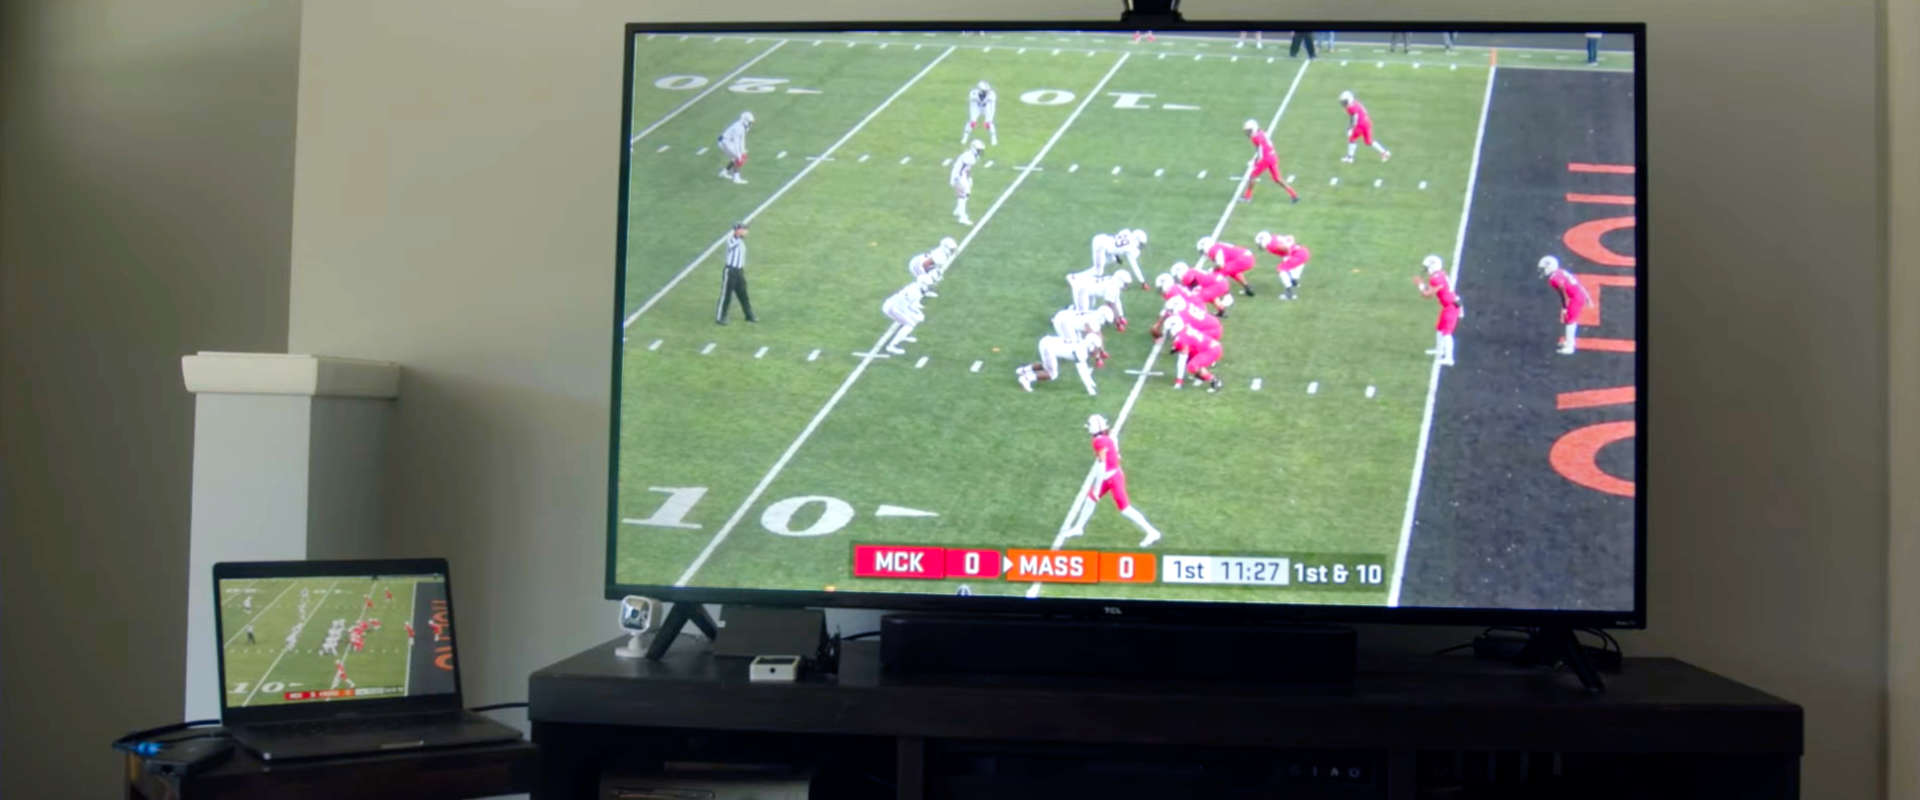 Laptop connected to smart TV with HDMI cable live streaming a football game